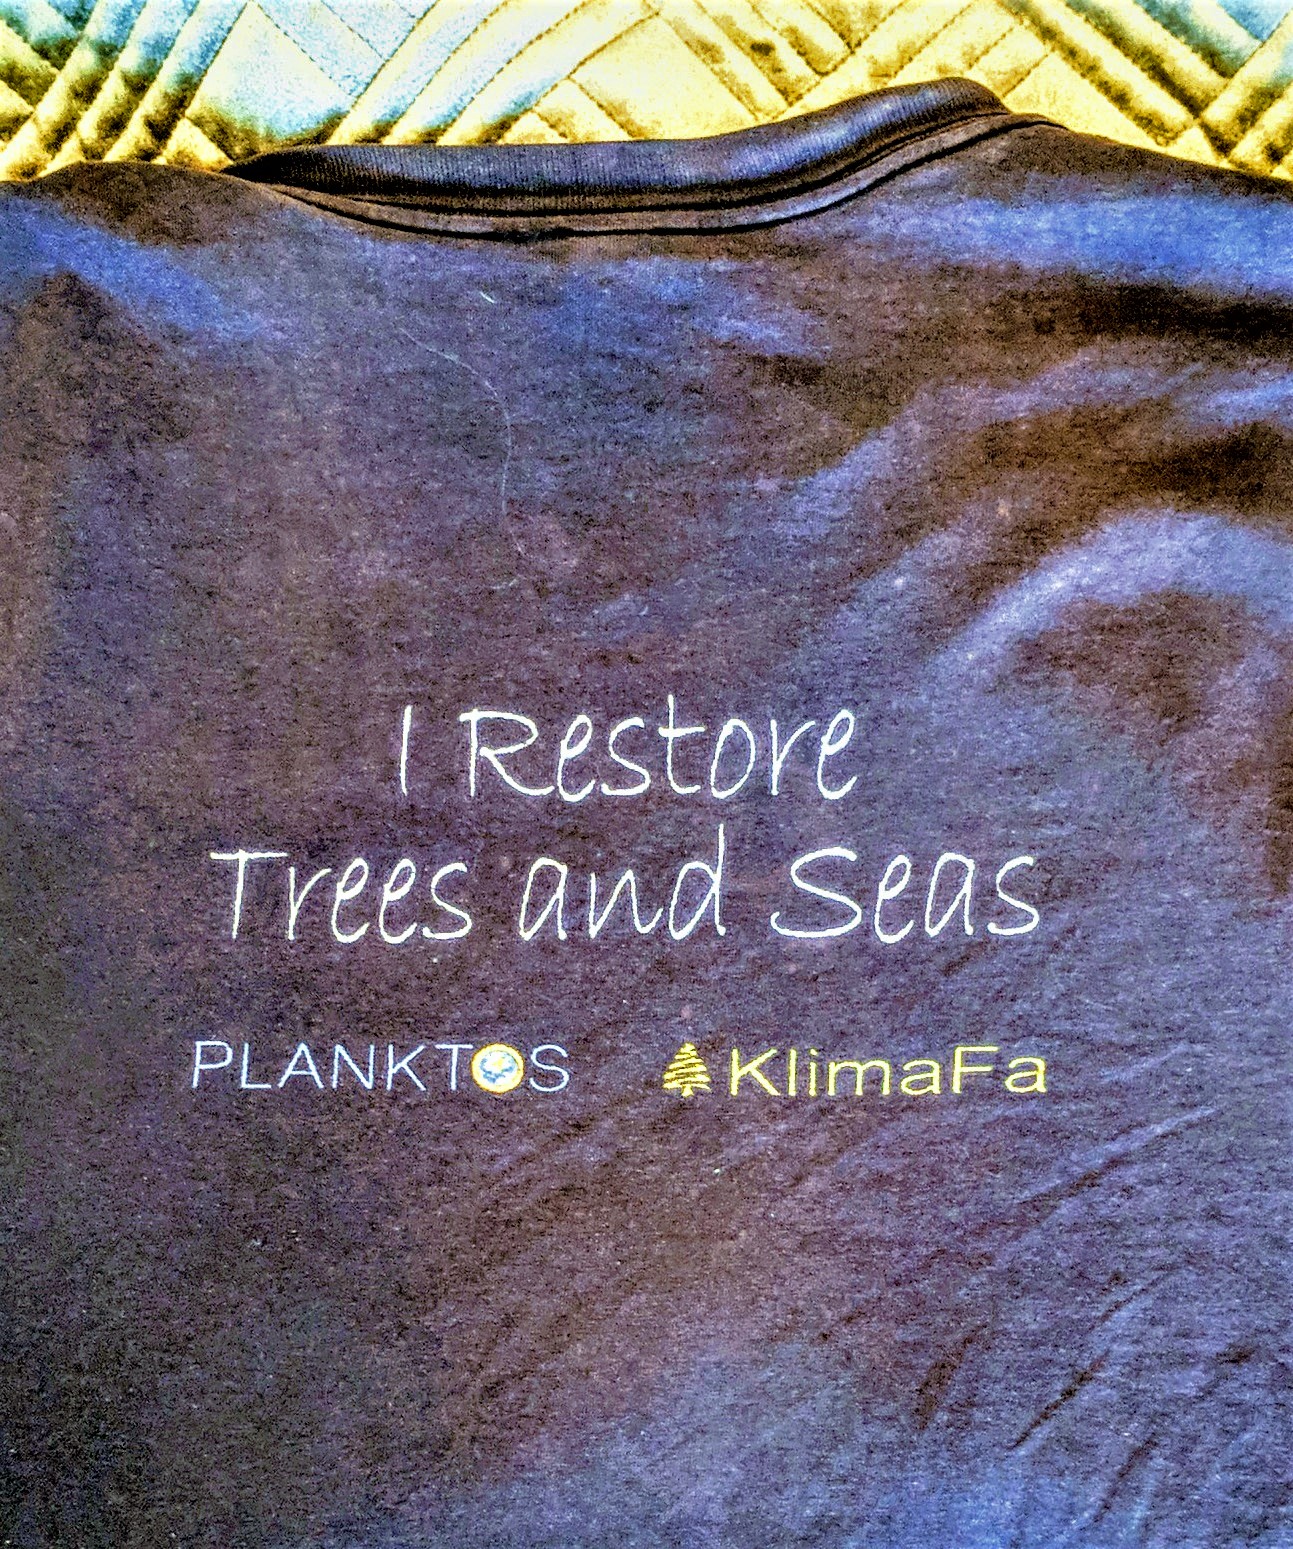 Trees and Seas T-Shirt at the start of the climate war